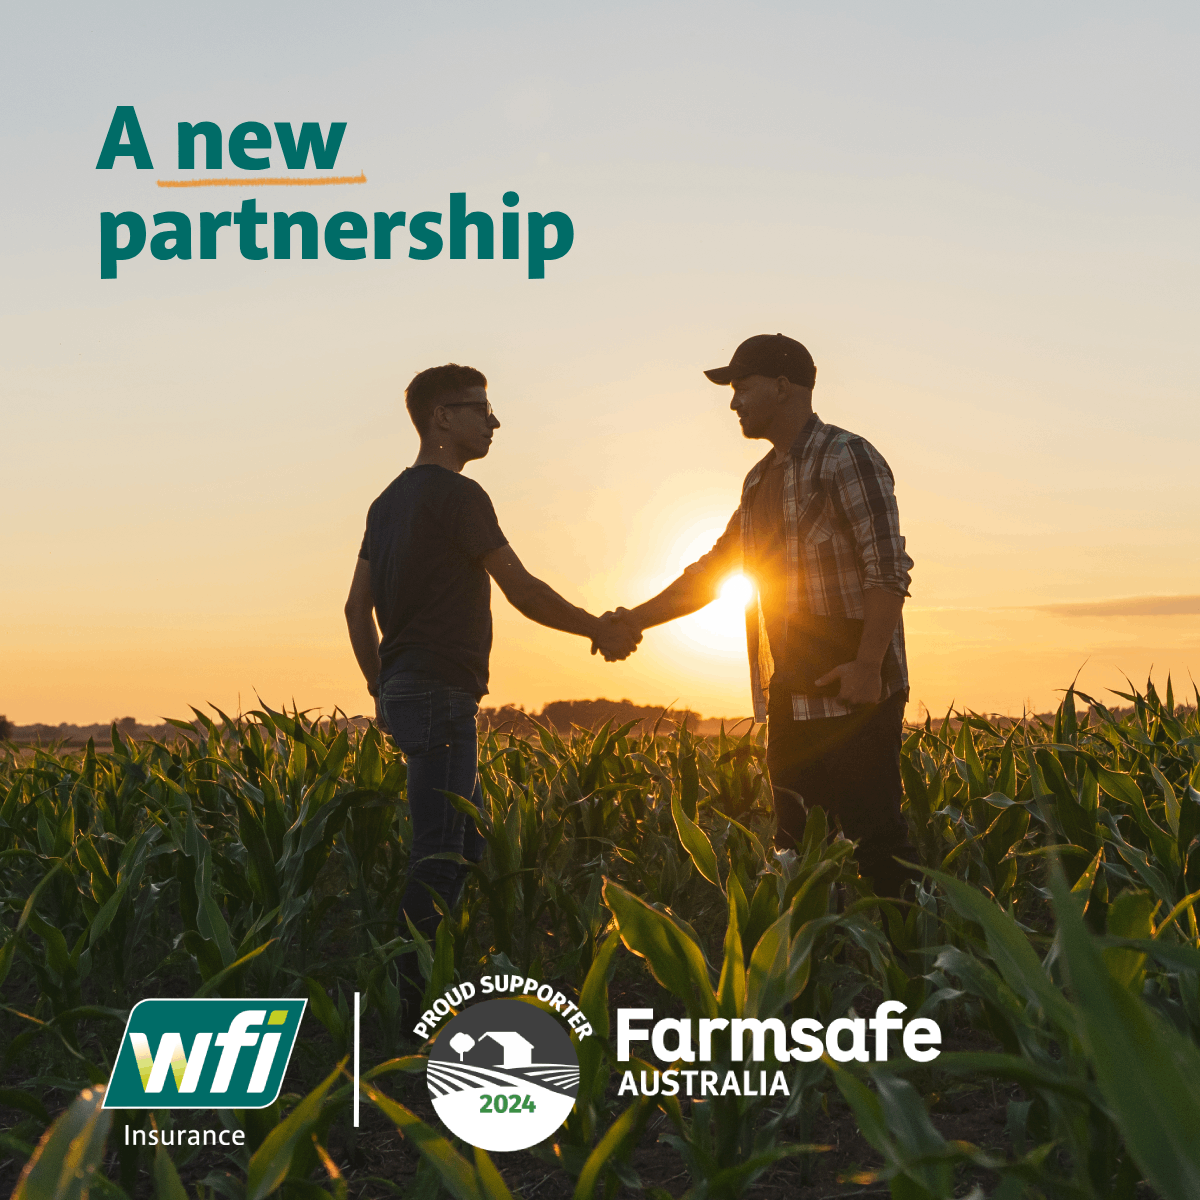 WFI Insurance and Farmsafe Australia forge partnership to promote safer work practices on farms